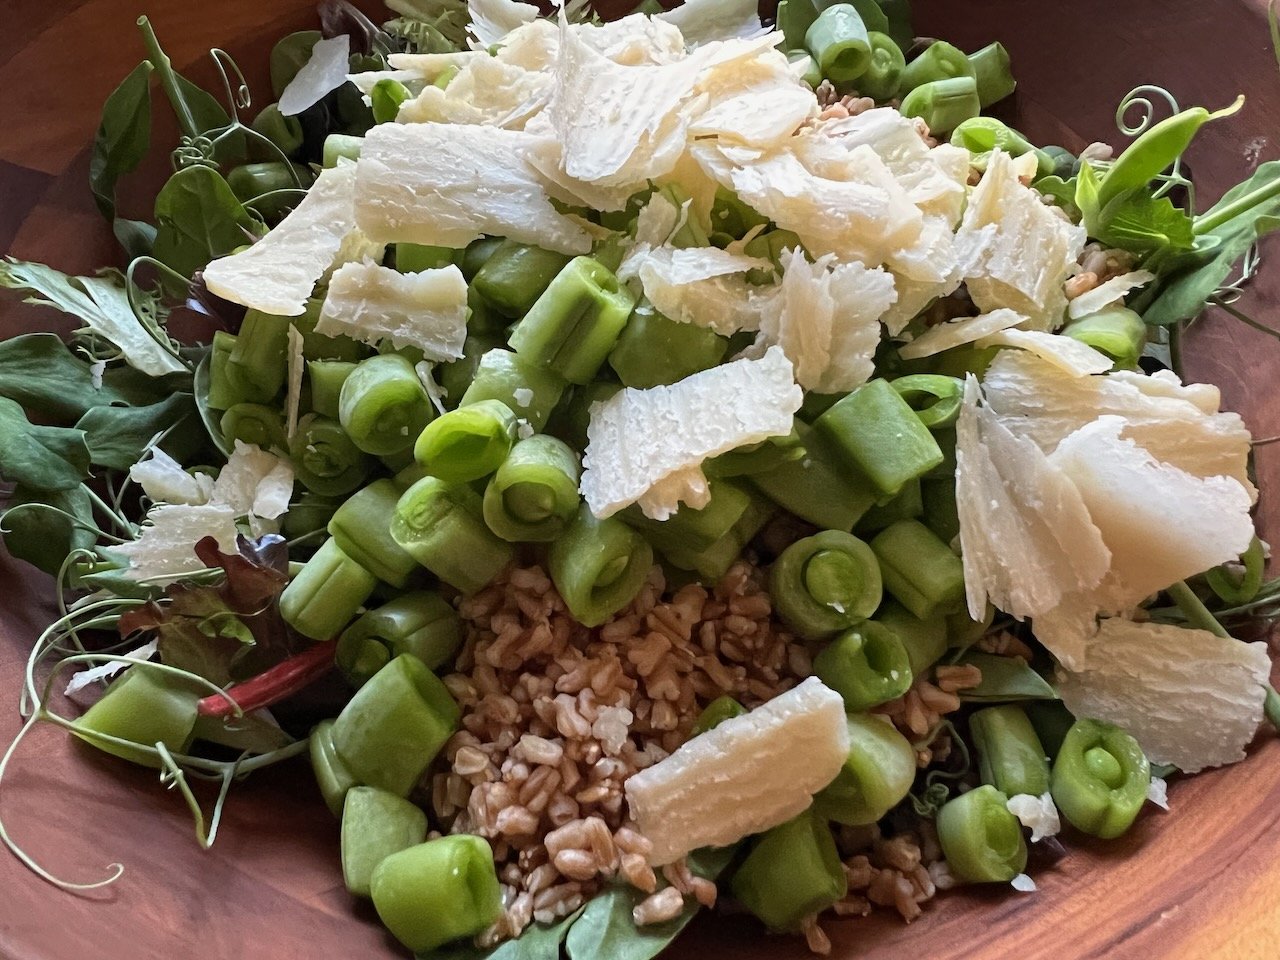 Best Snap Pea Salad Recipe - How to Make Garlicky Spring Salad